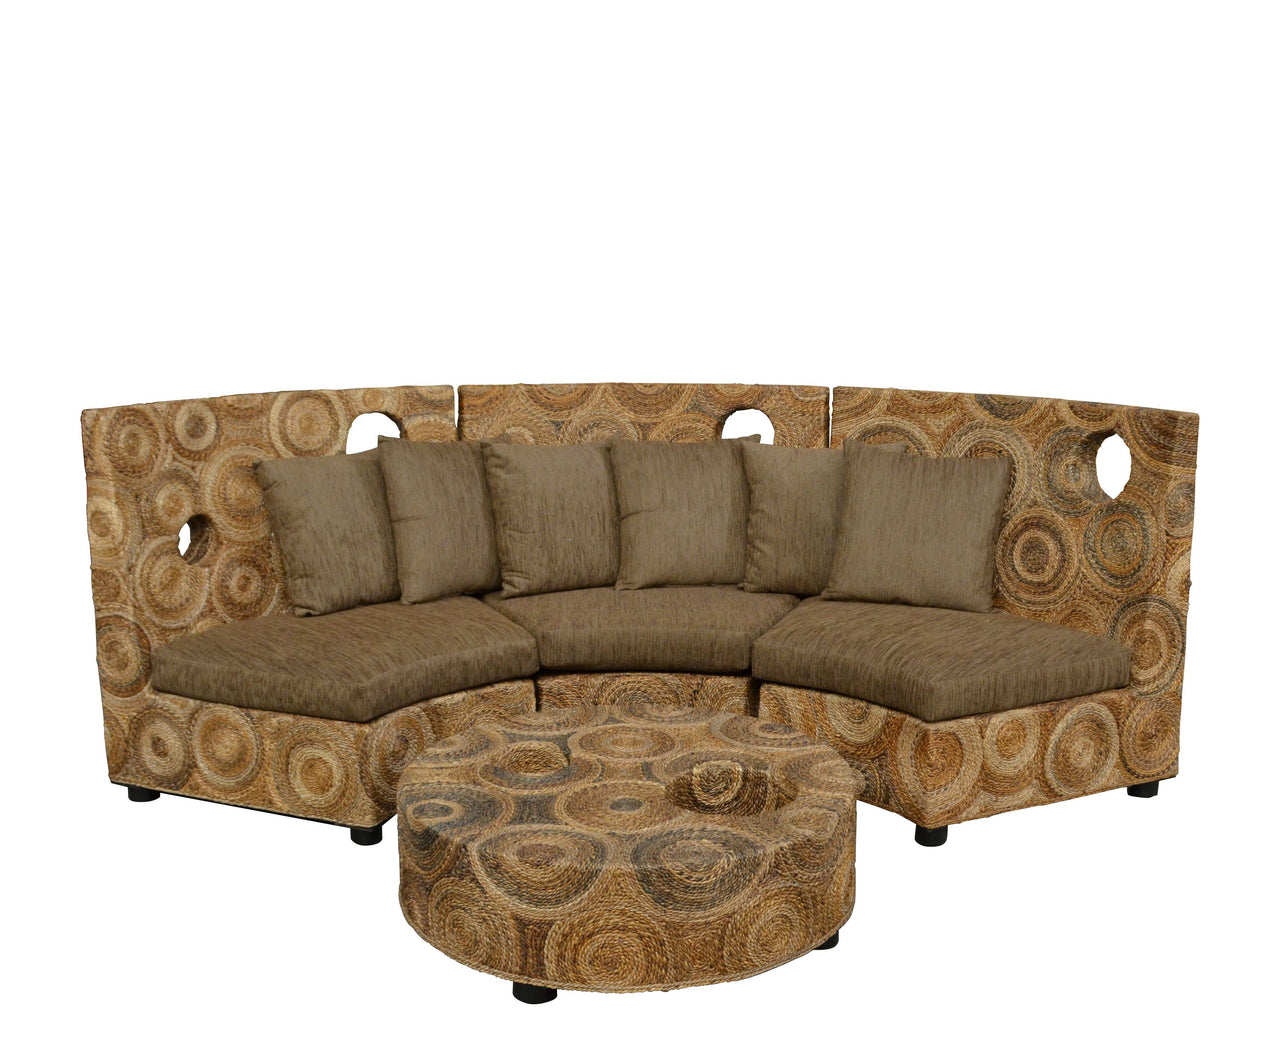 Cyrus Sofa Section Outdoor Furniture Tuscan 